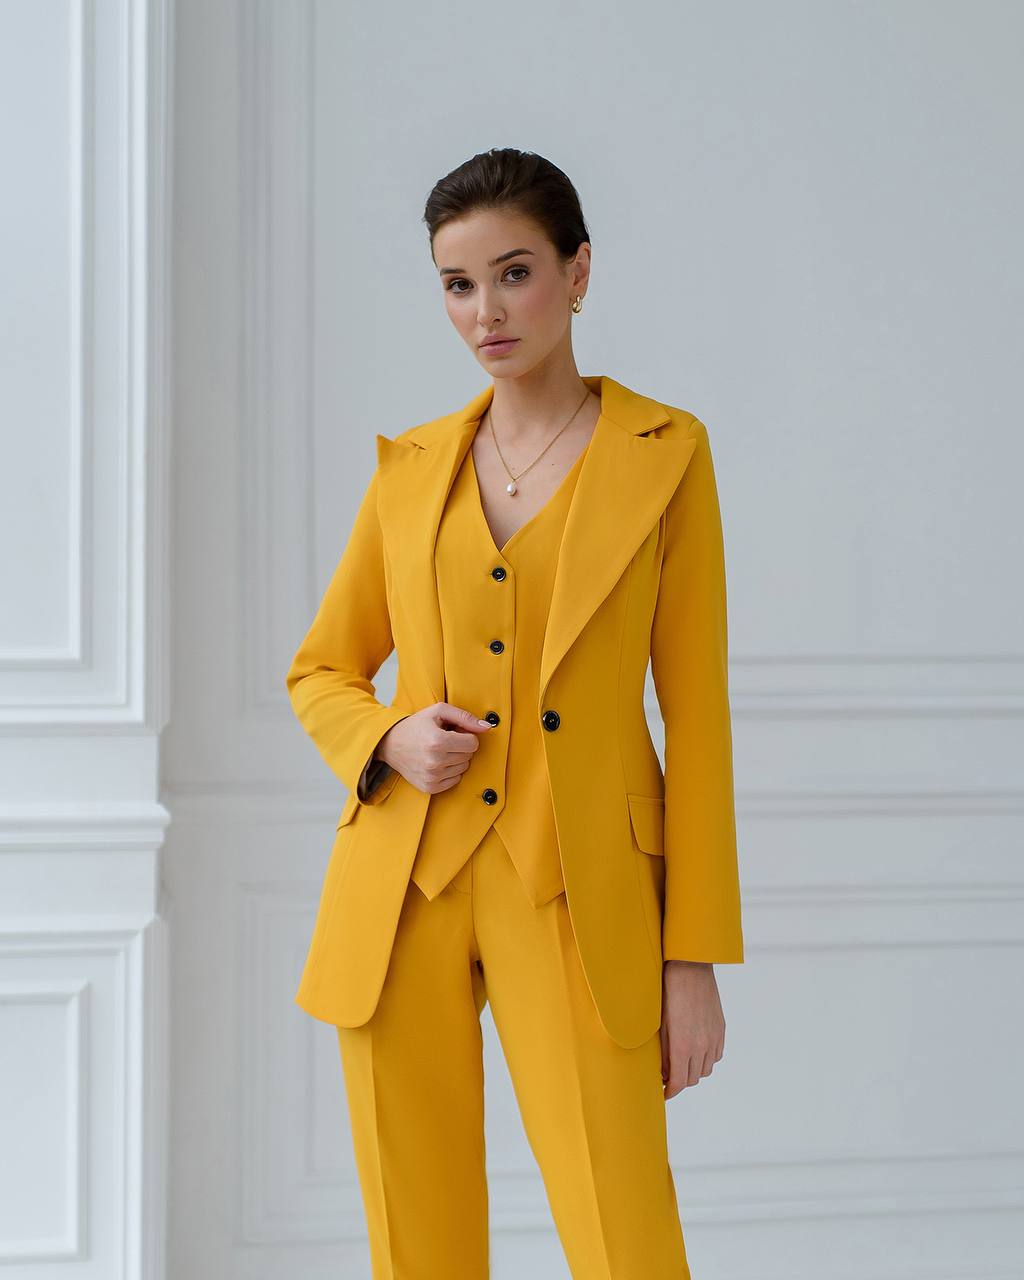 a woman in a yellow suit standing in front of a white wall